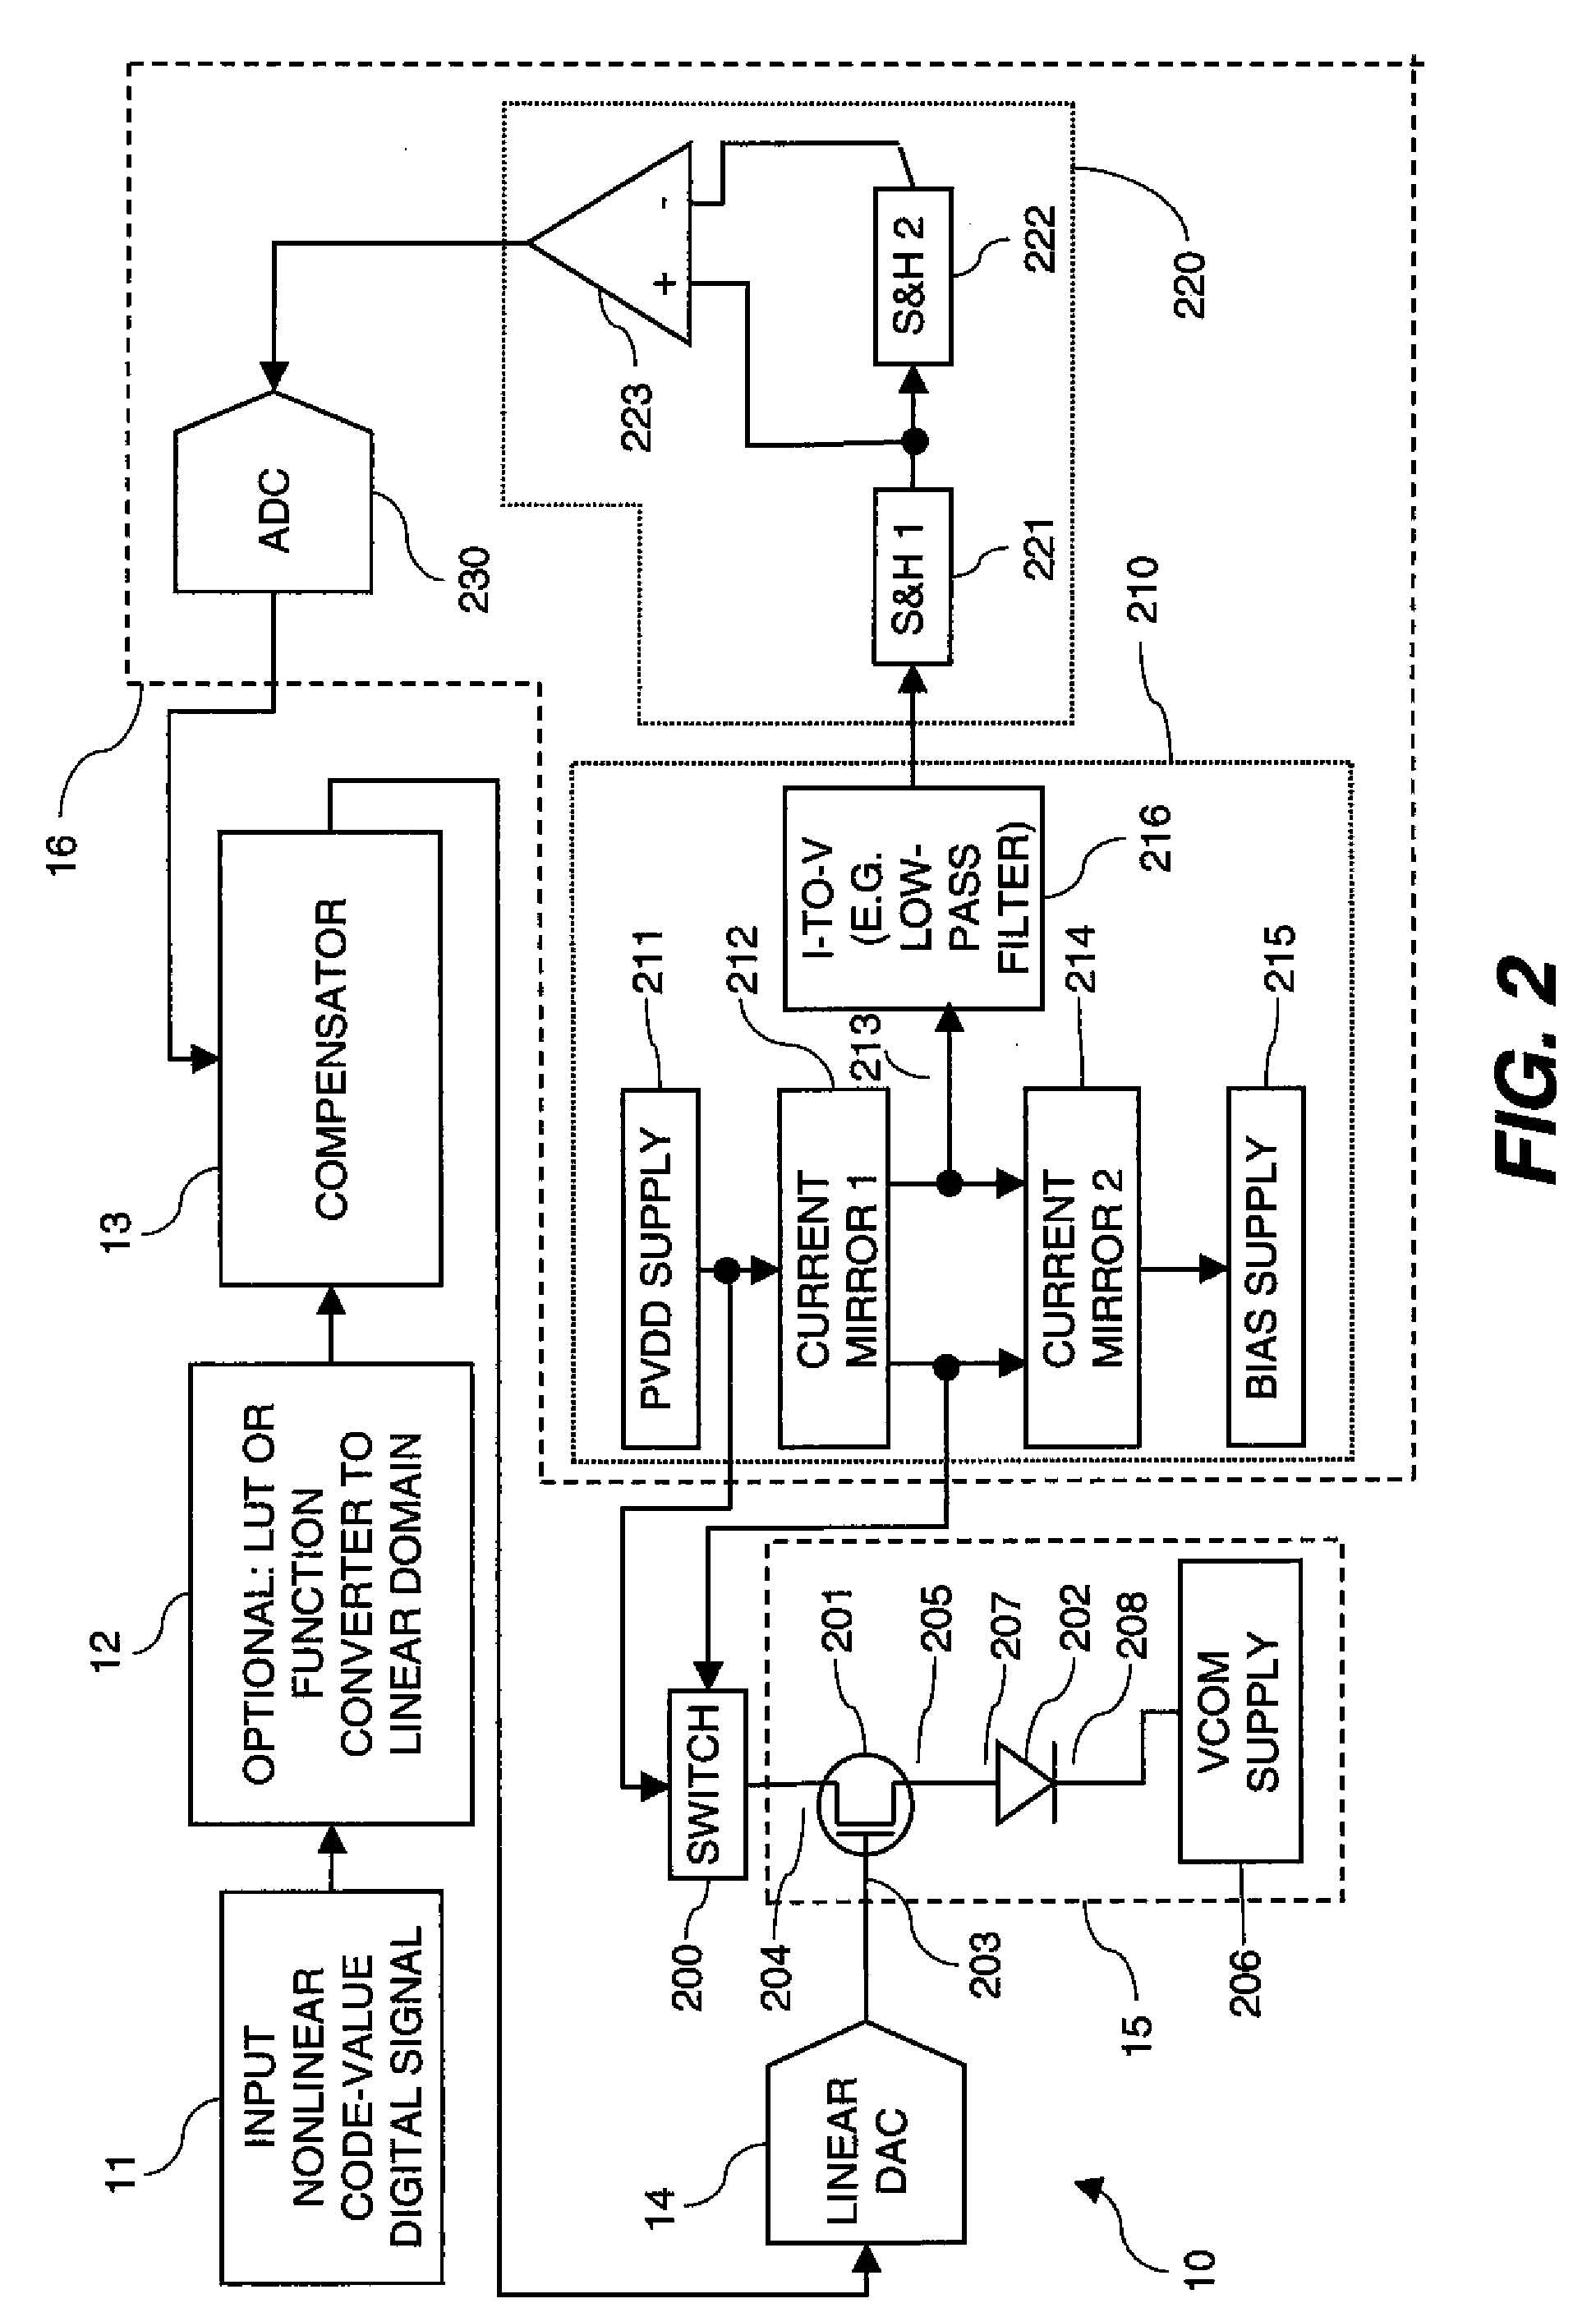 Electroluminescent display compensated analog transistor drive signal